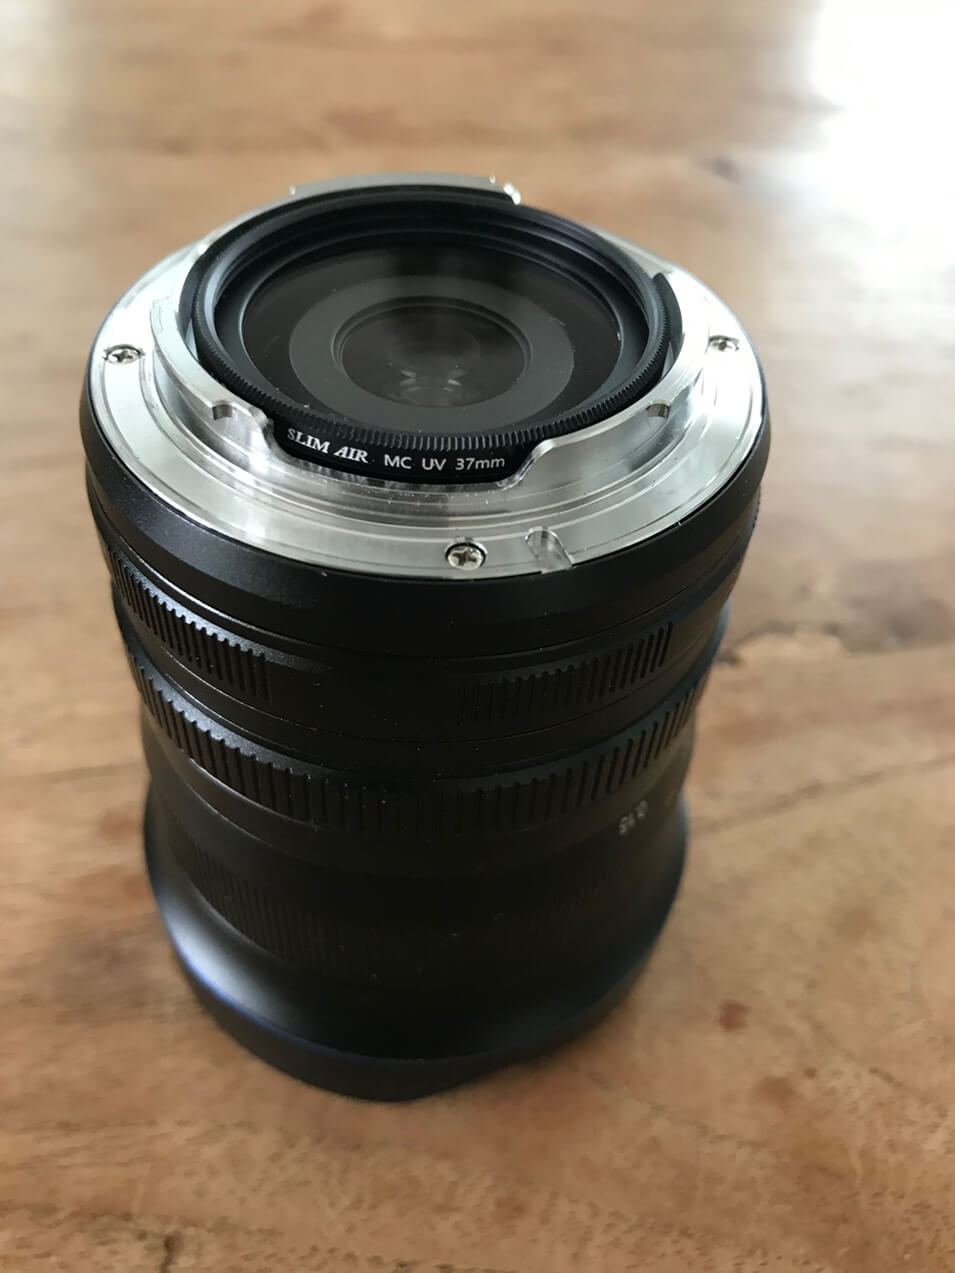 Product review Laowa 10-18mm f/4.5-5.6 lens - 20